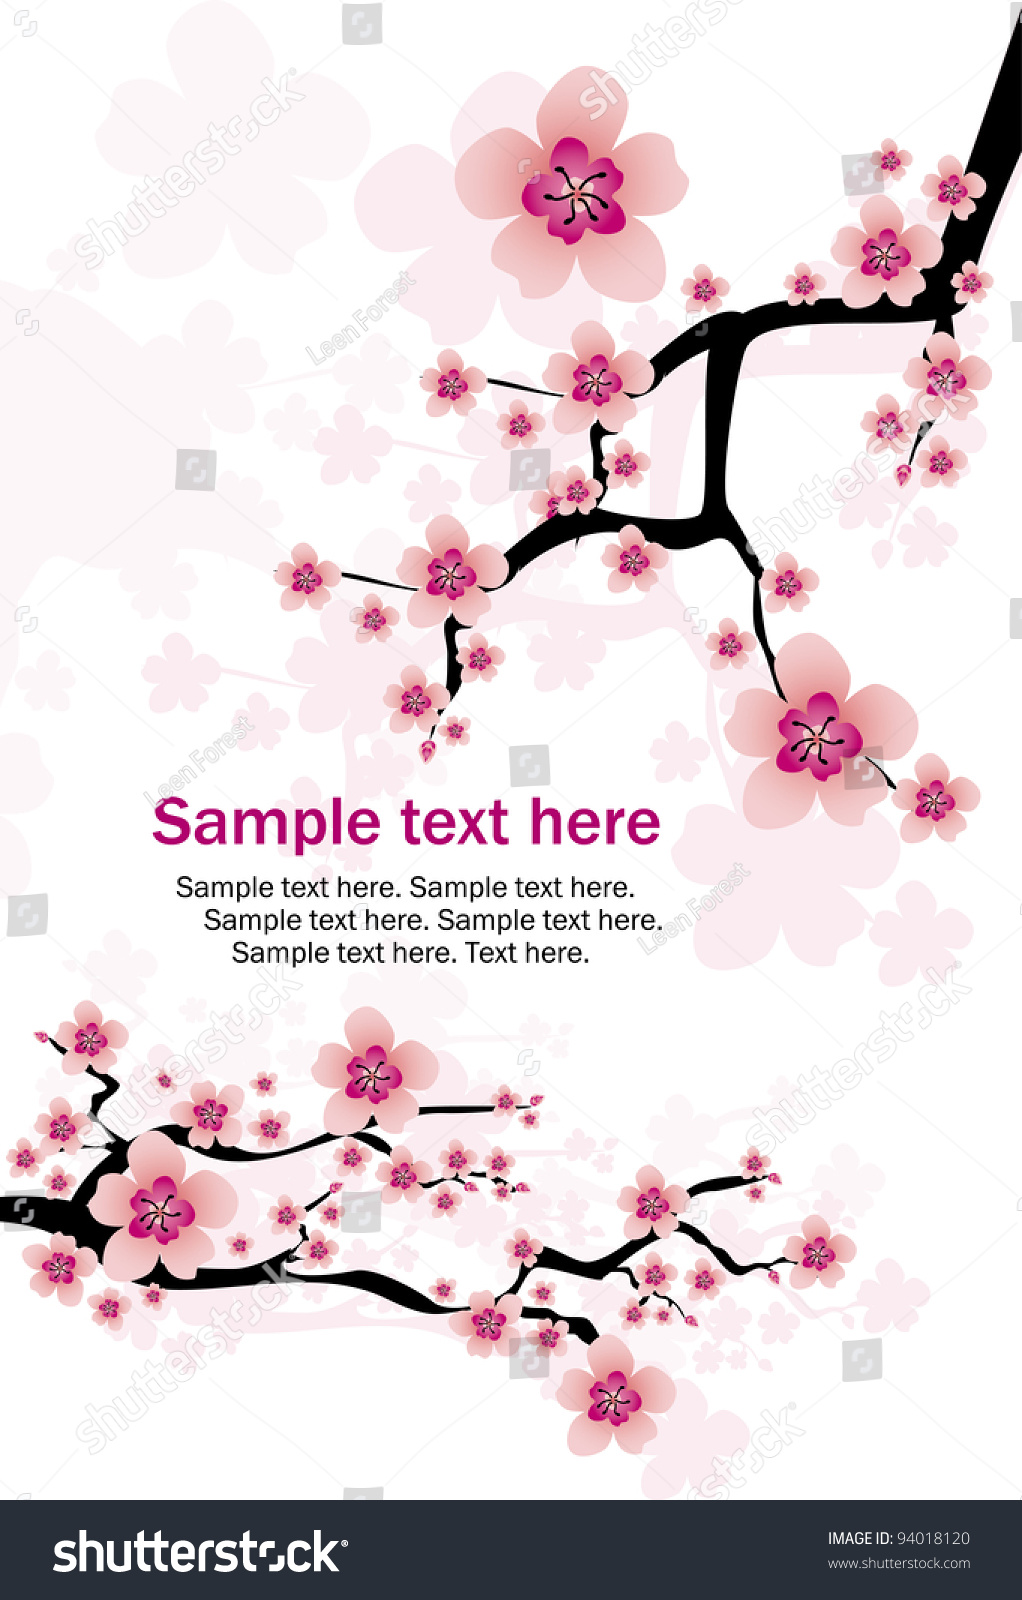 Abstract White Background With Cherry Blossom And Text Stock Vector ...